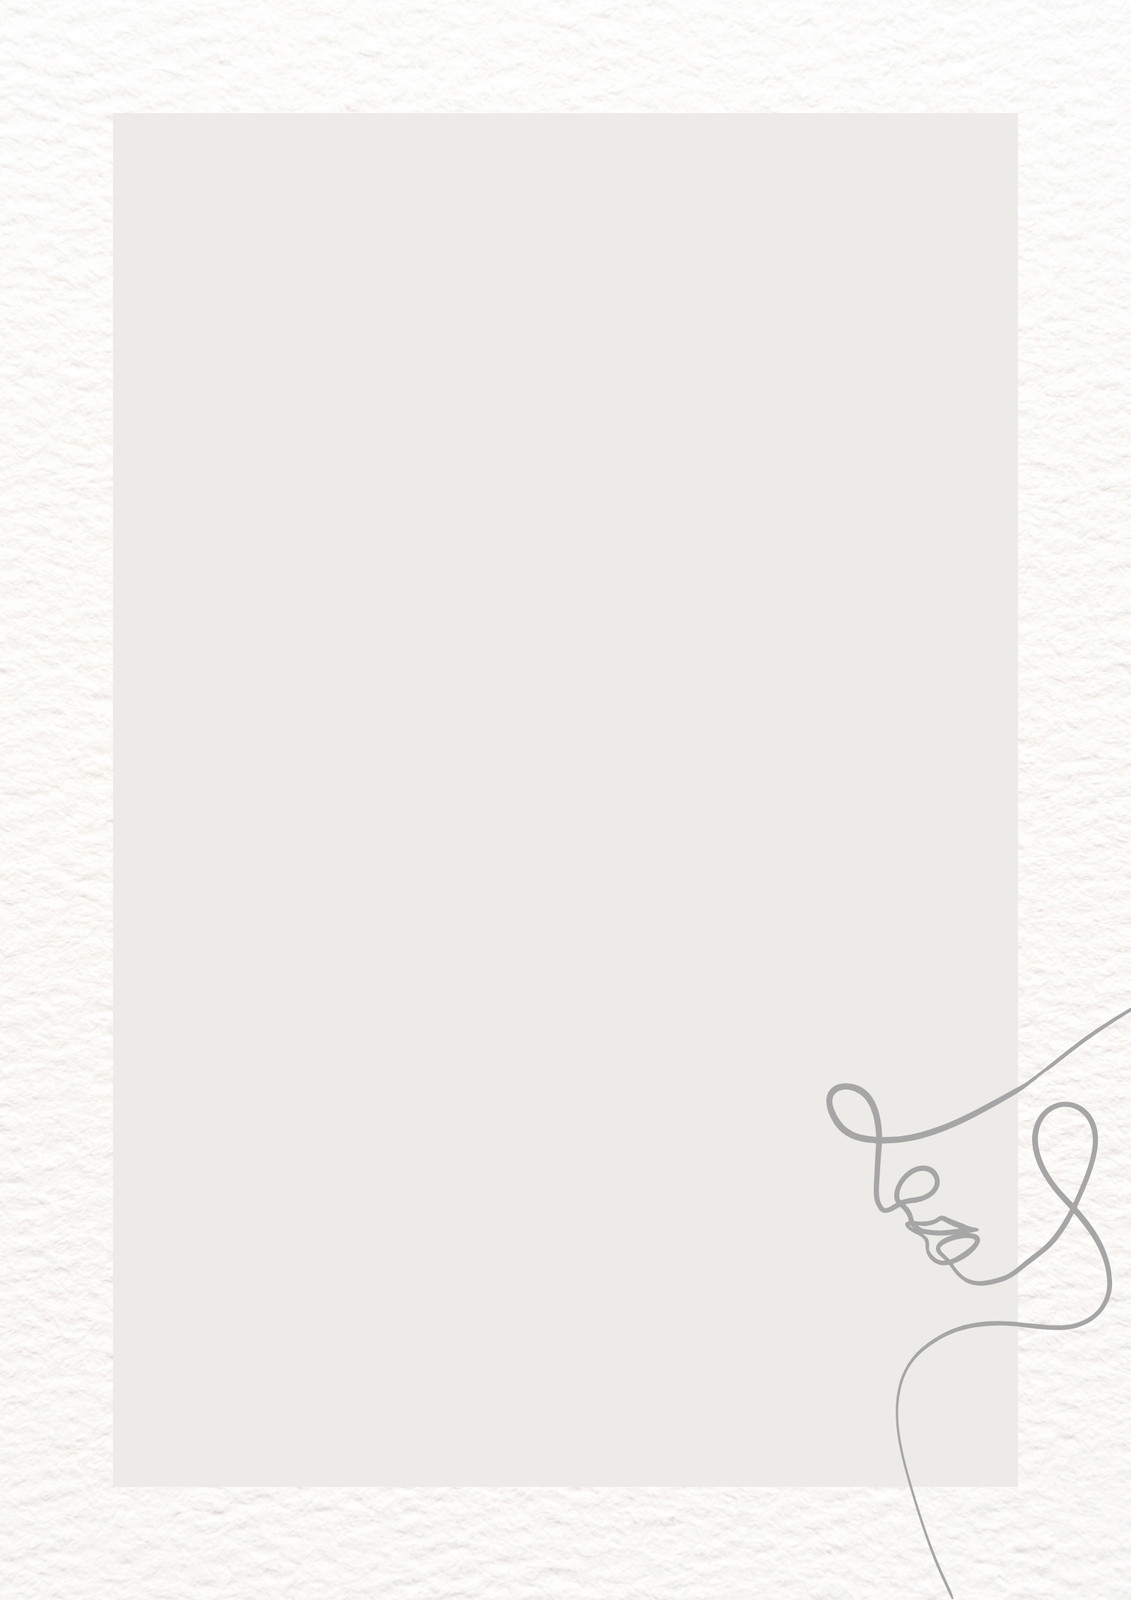 Page 9 - Free printable page border templates you can customize ...